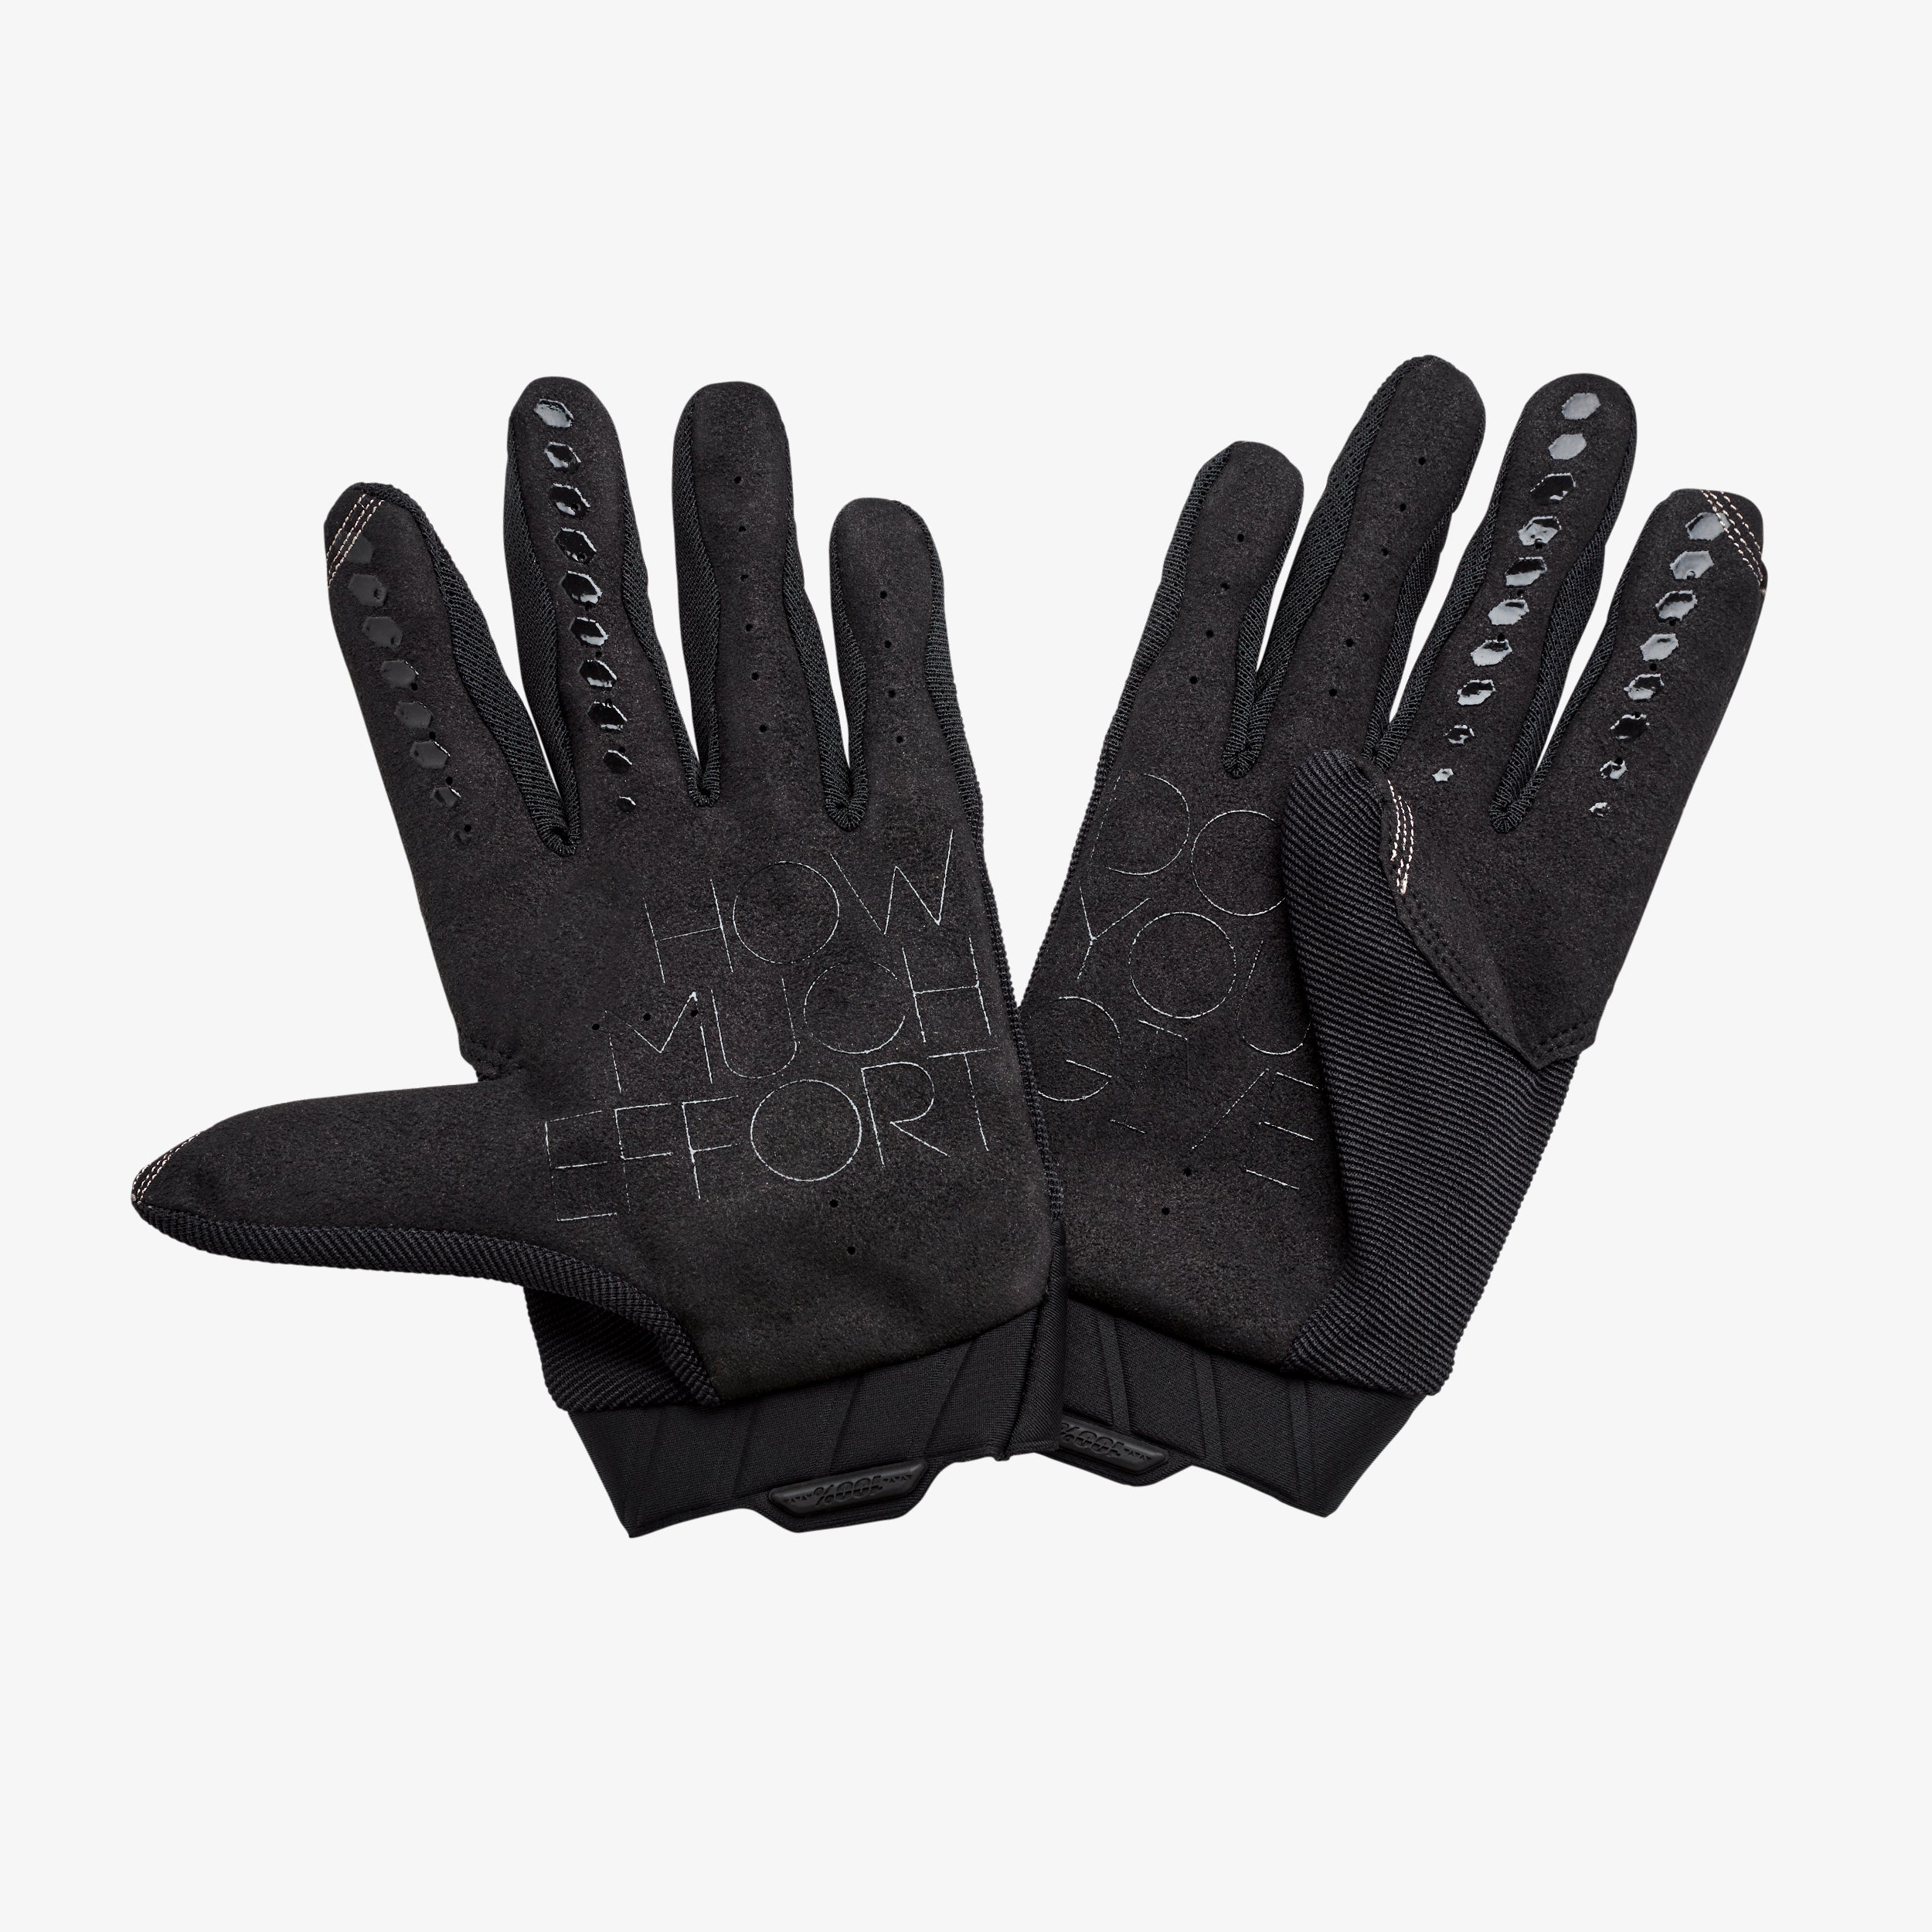 GEOMATIC Gloves Black/Charcoal MTB - Secondary